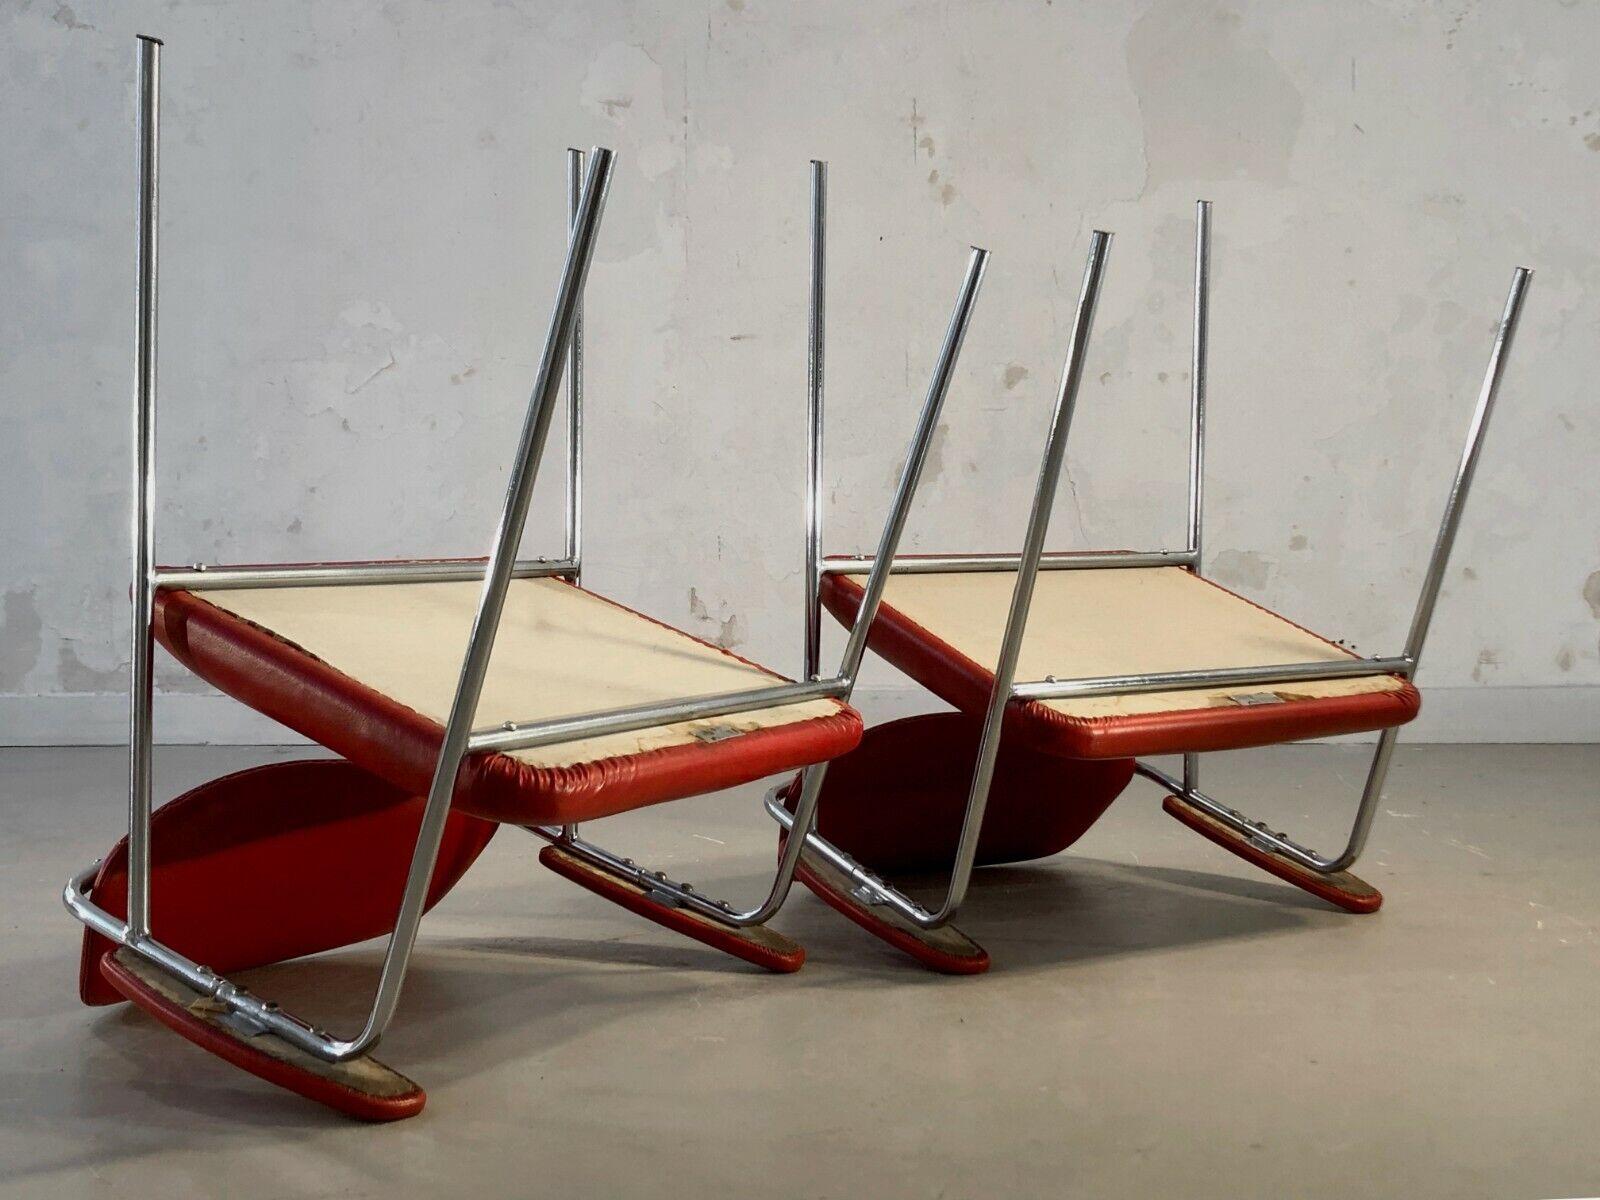 2 MID-CENTURY-MODERN MODERNIST CHAIRS by PIERRE PAULIN, STEINER, France 1950 For Sale 5